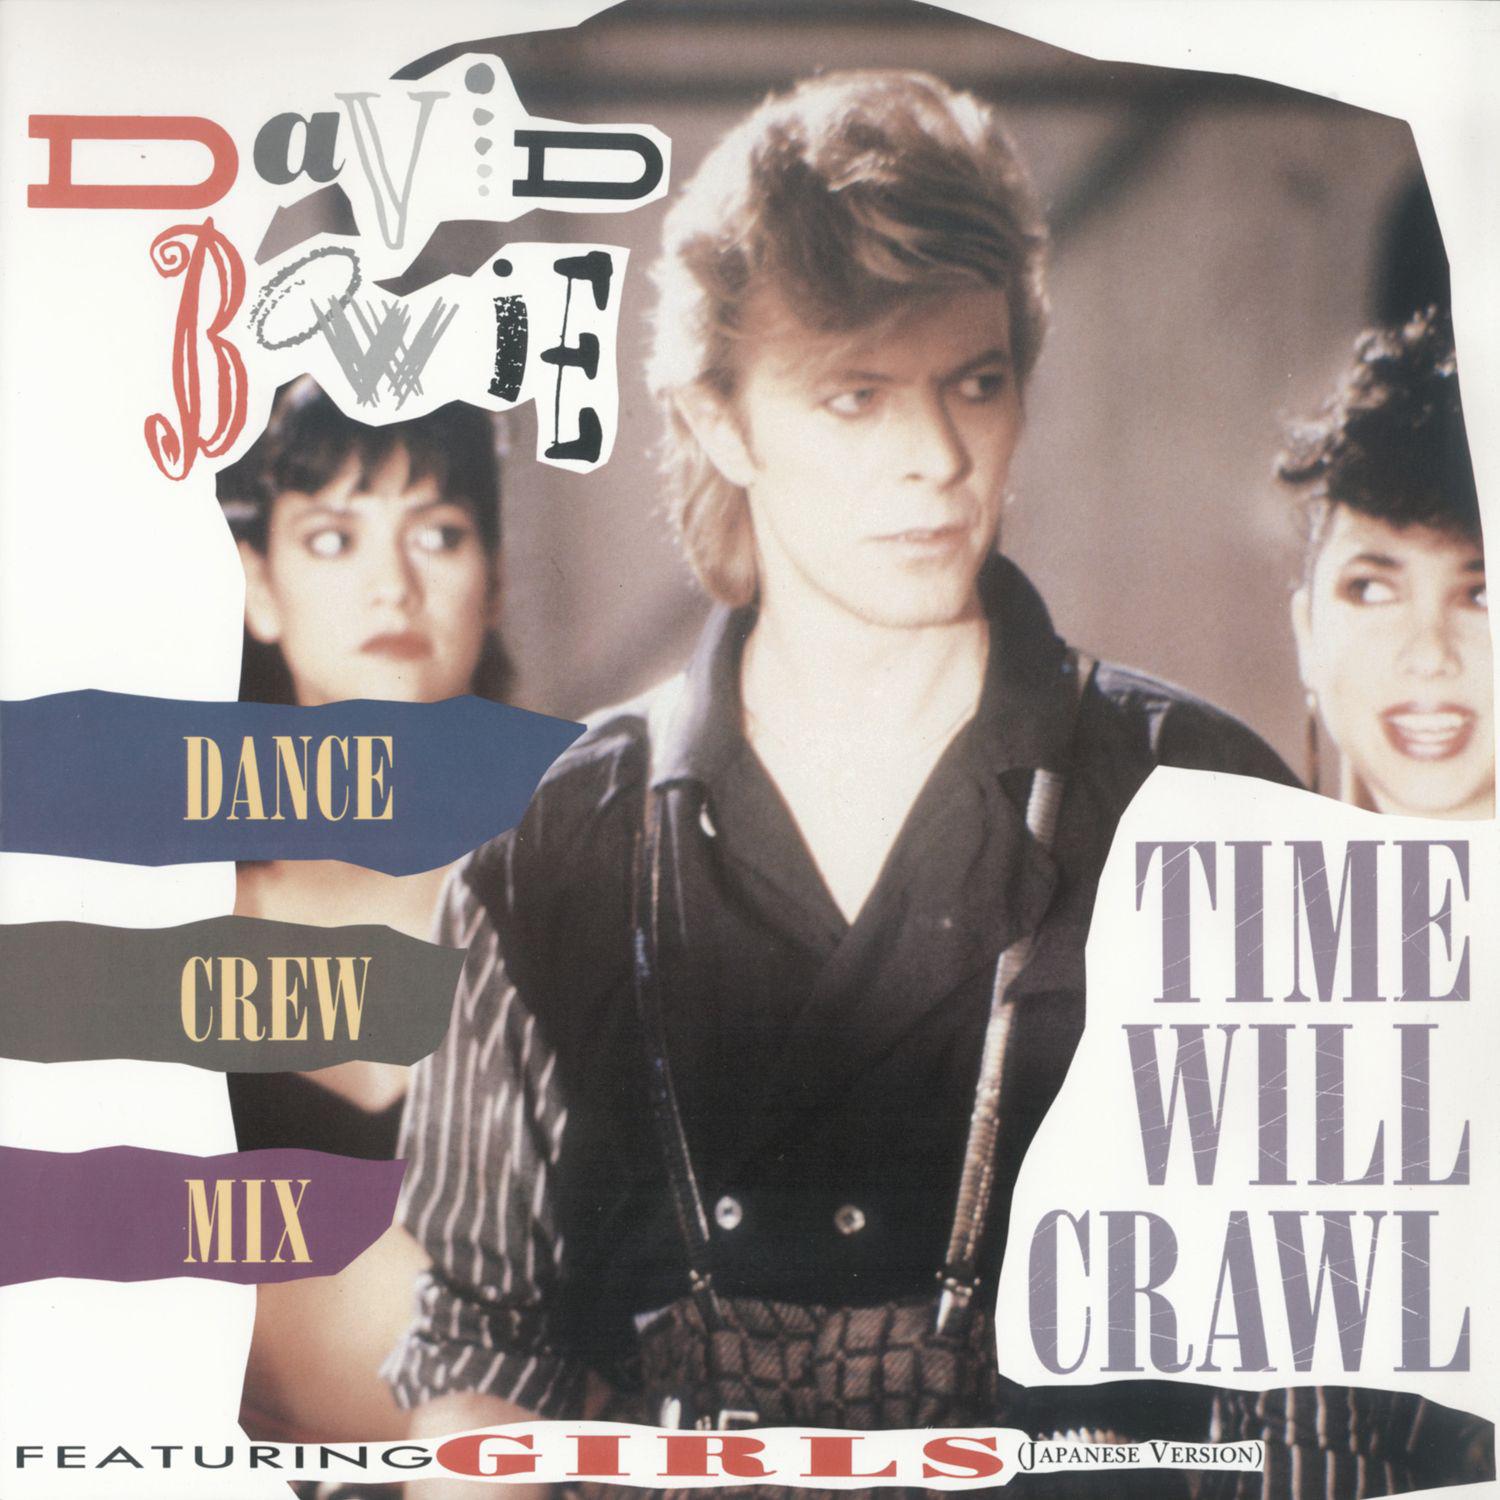 Time Will Crawl E.P. [Japanese Version]